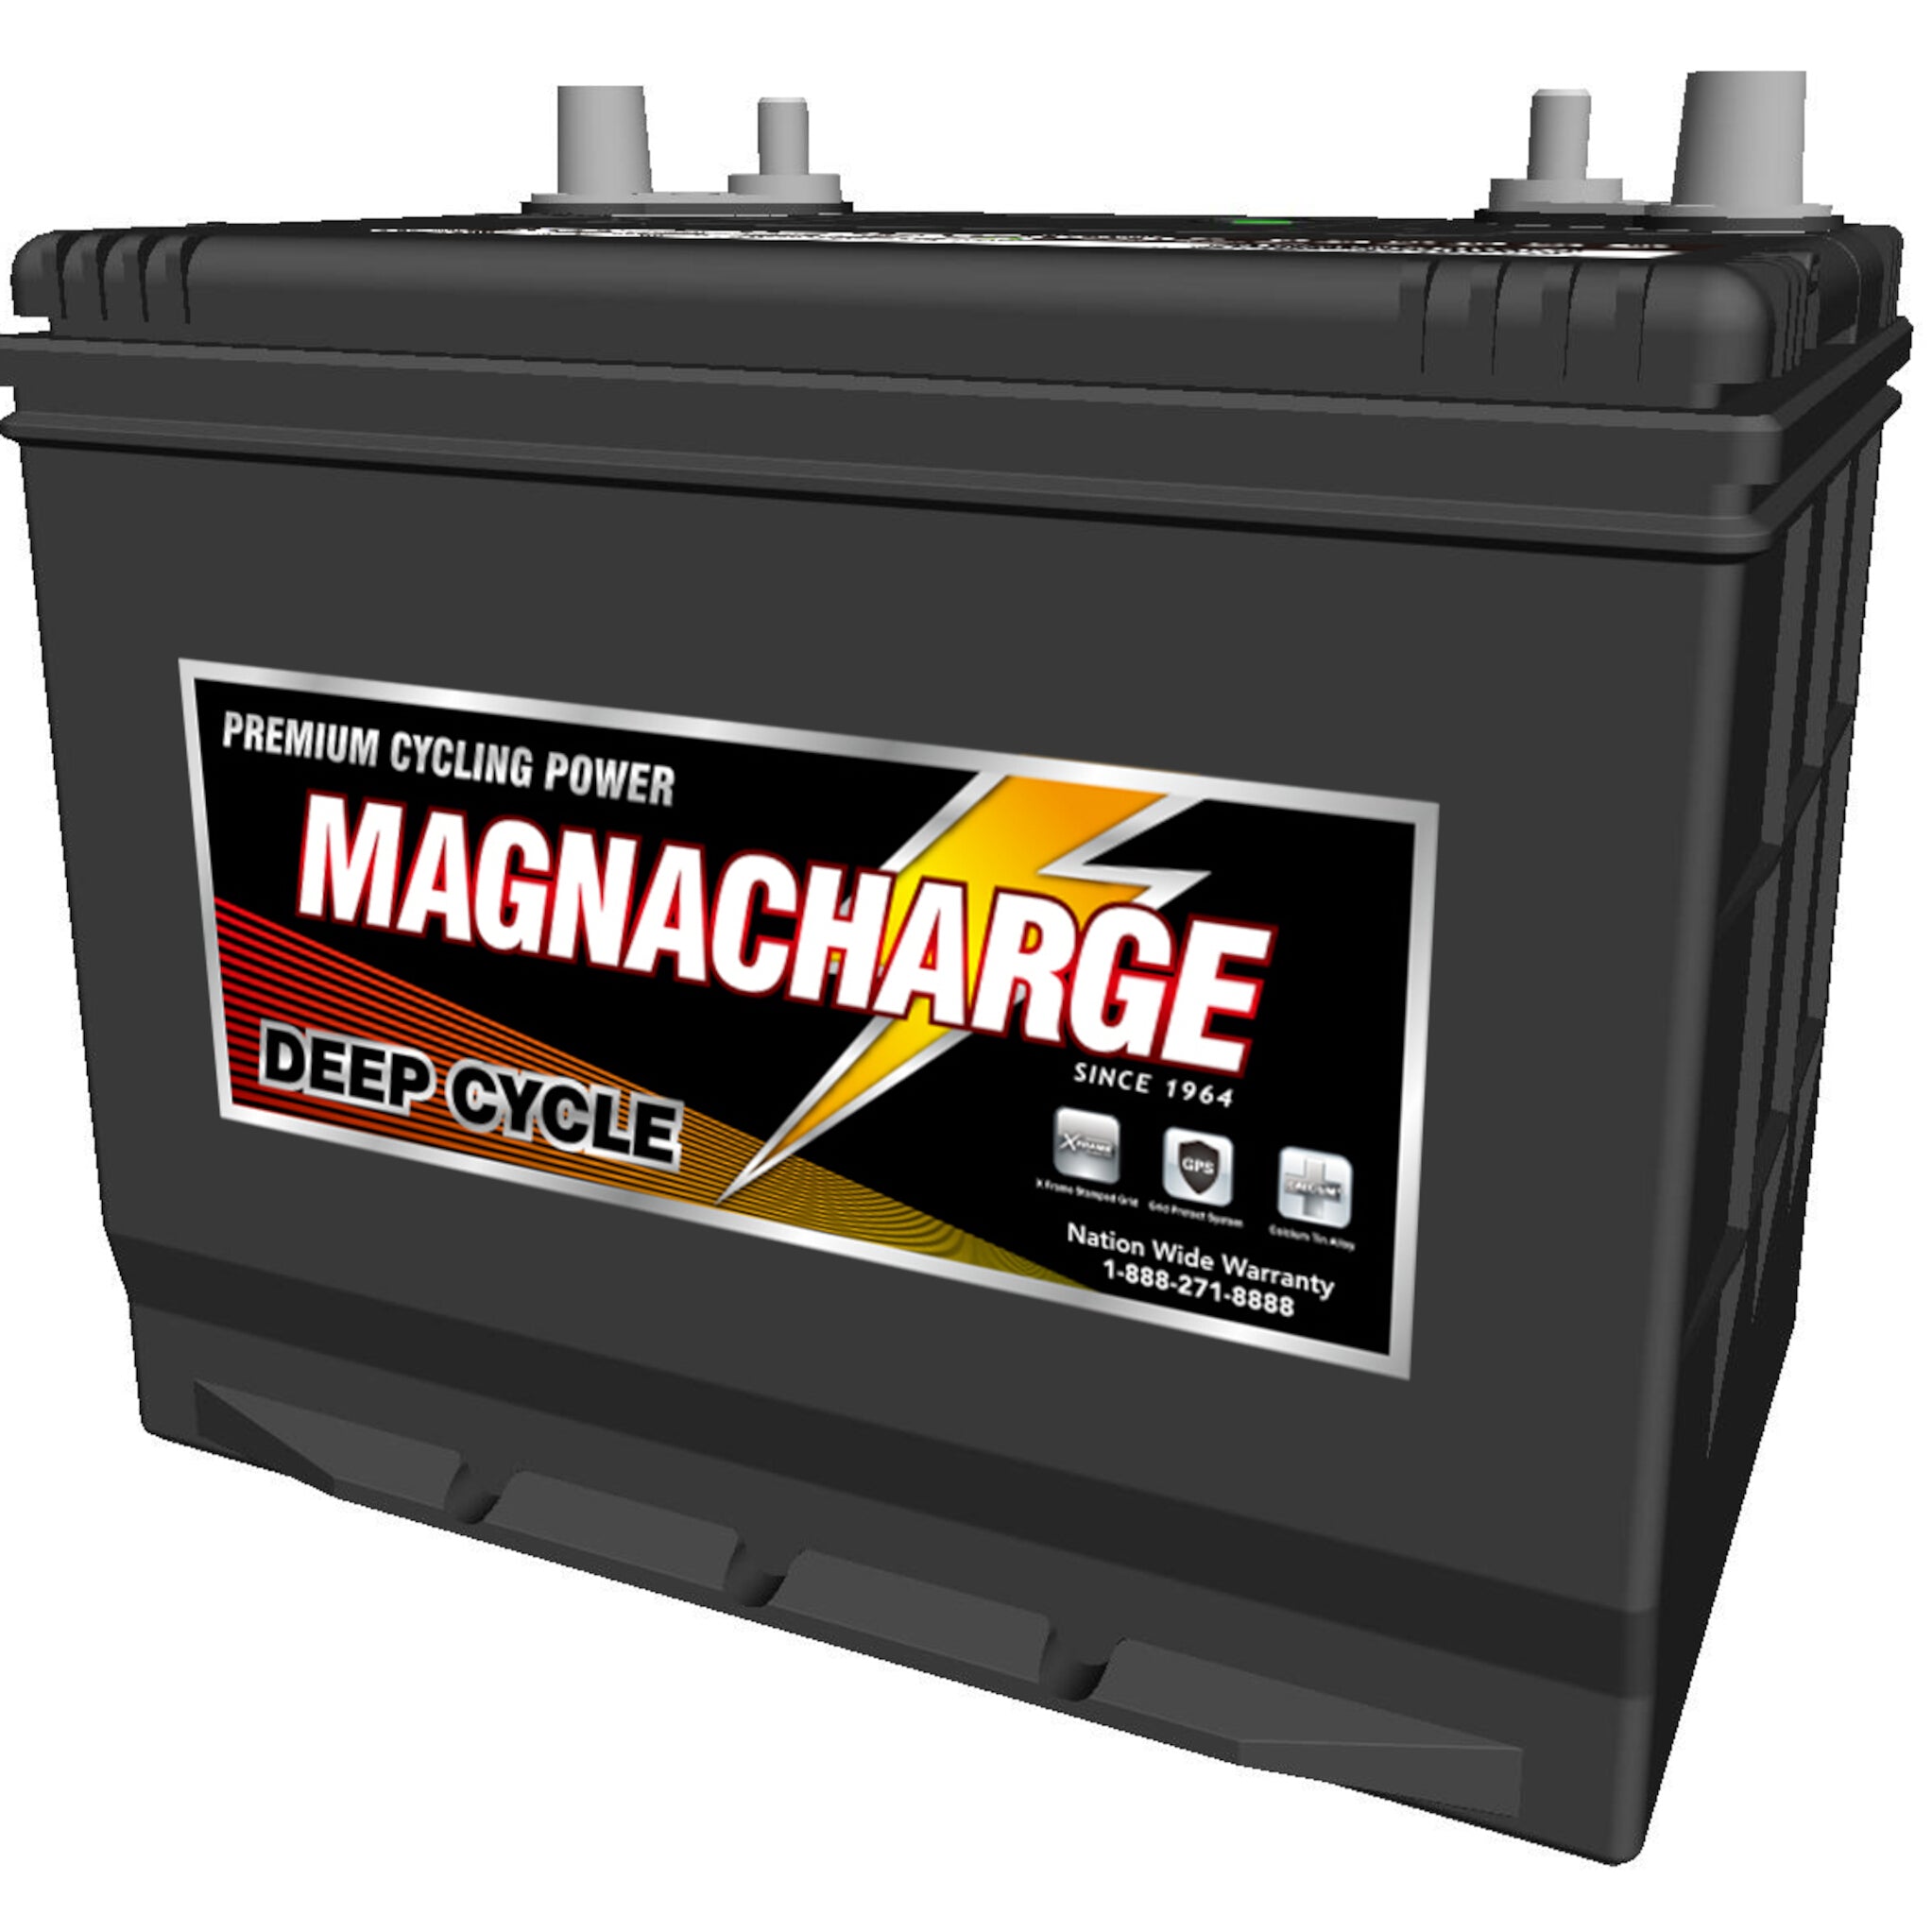 Magnacharge 24DC-140 12V Deep Cycle Group 24 Battery